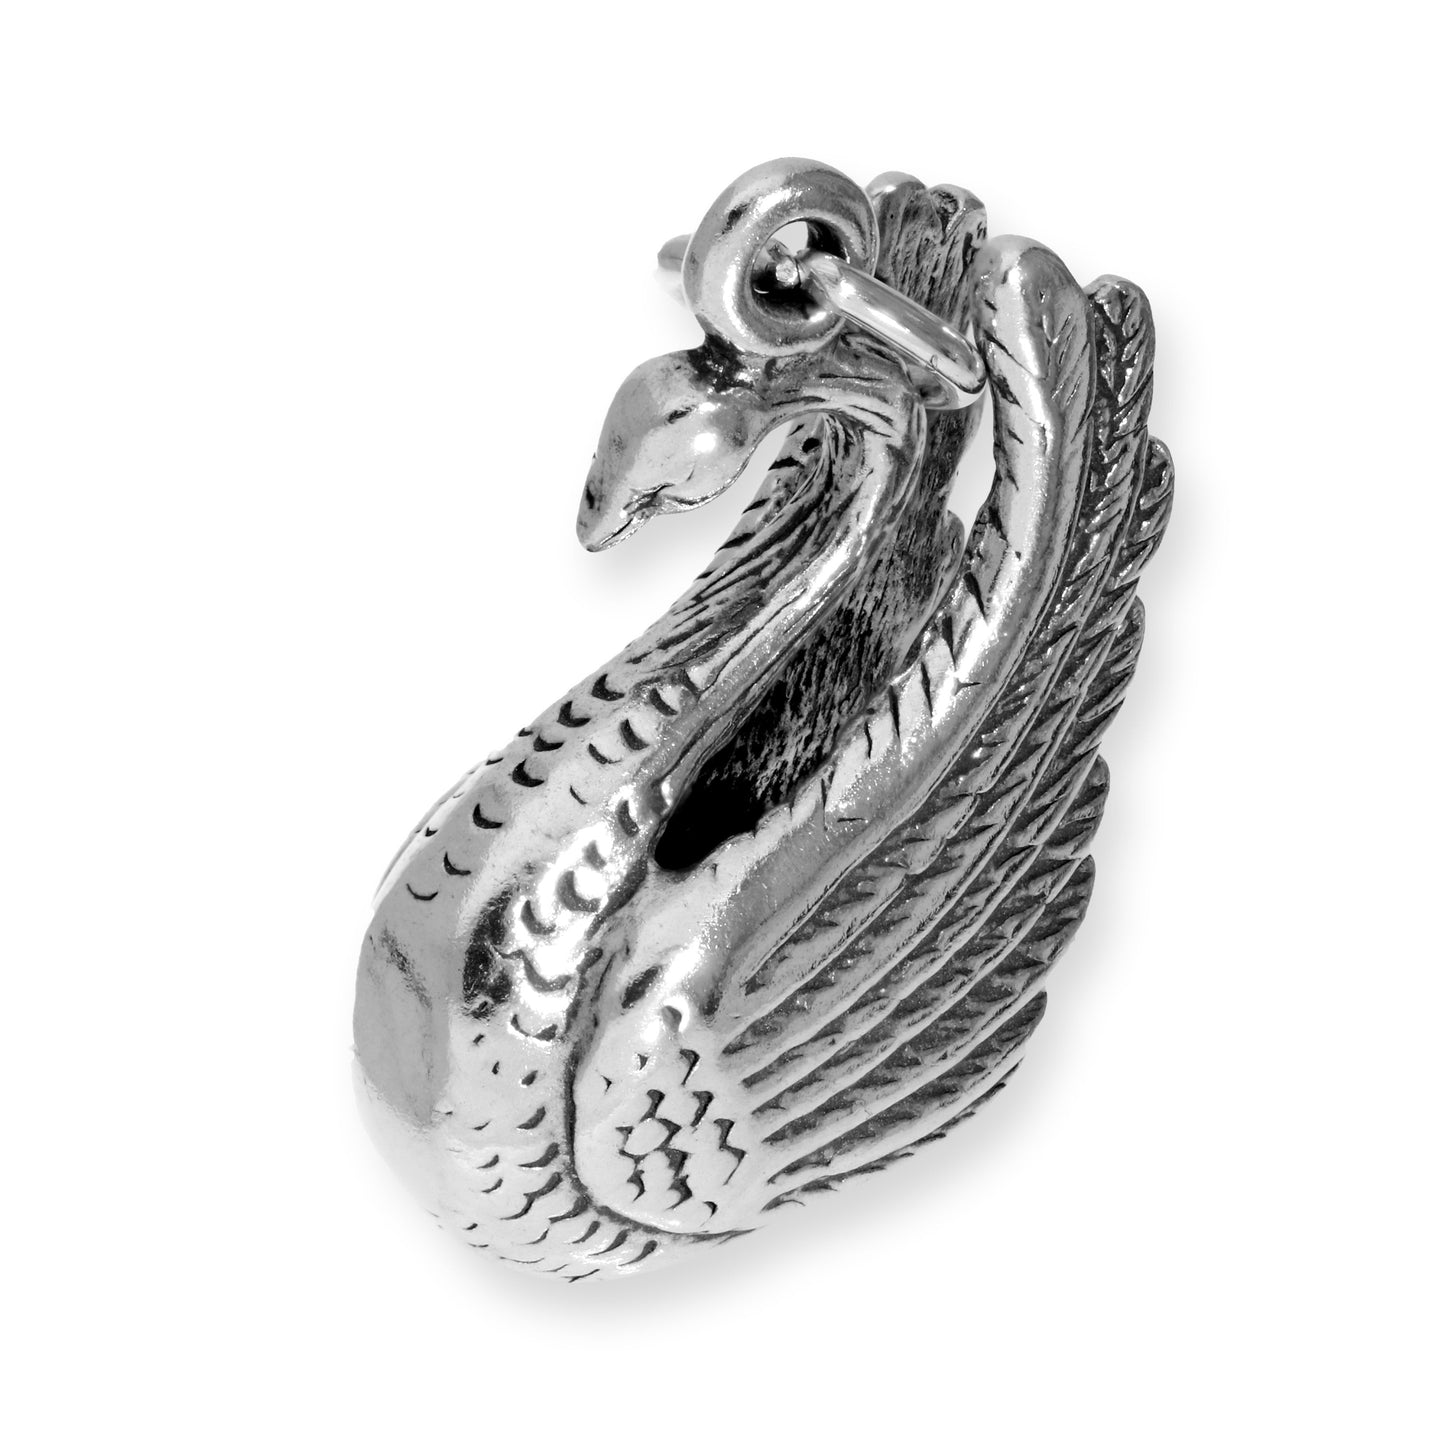 Sterling Silver Large Swan Charm